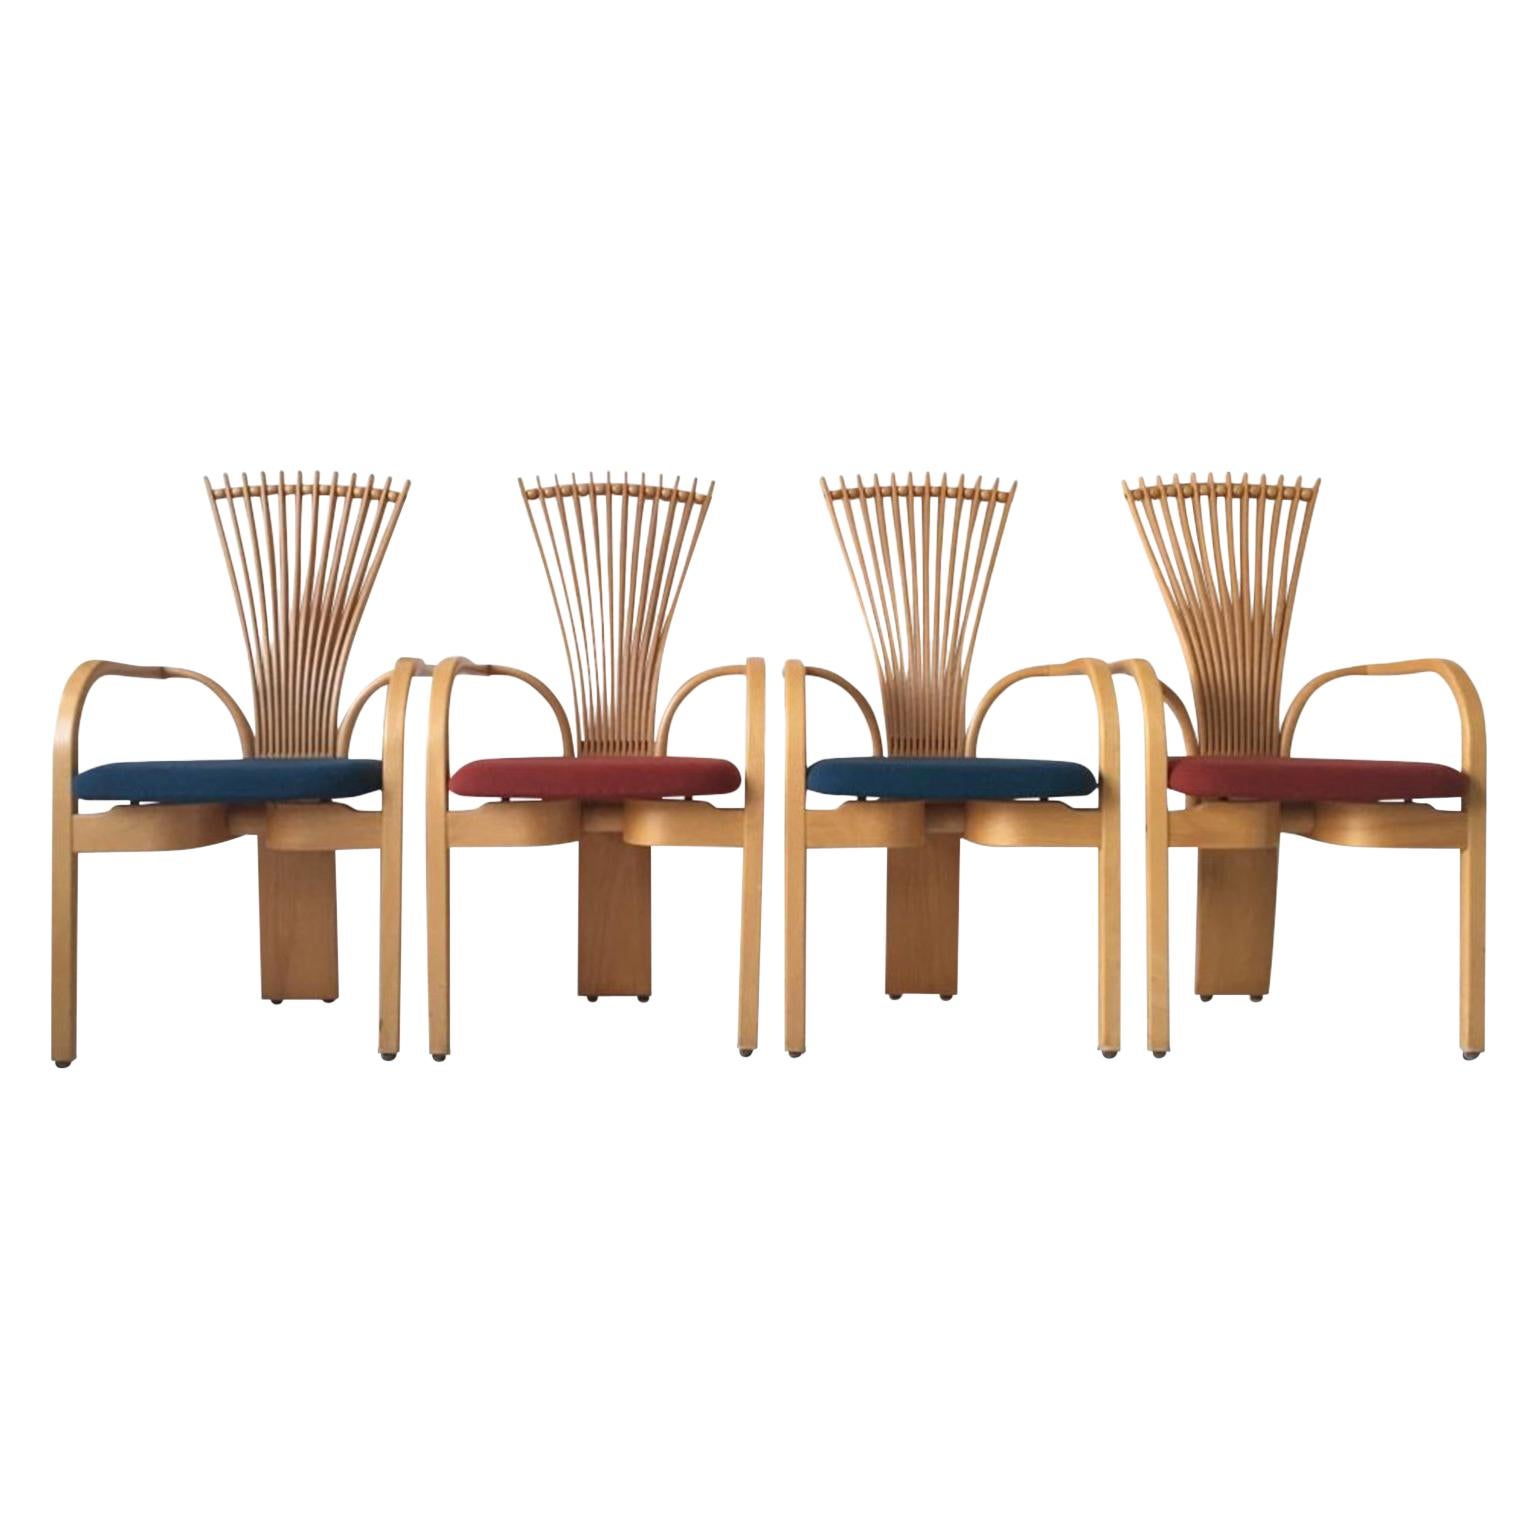 Extraordinary Memphis Style TOTEM Chairs by Torstein Nilsen for Westnofa, 1980s